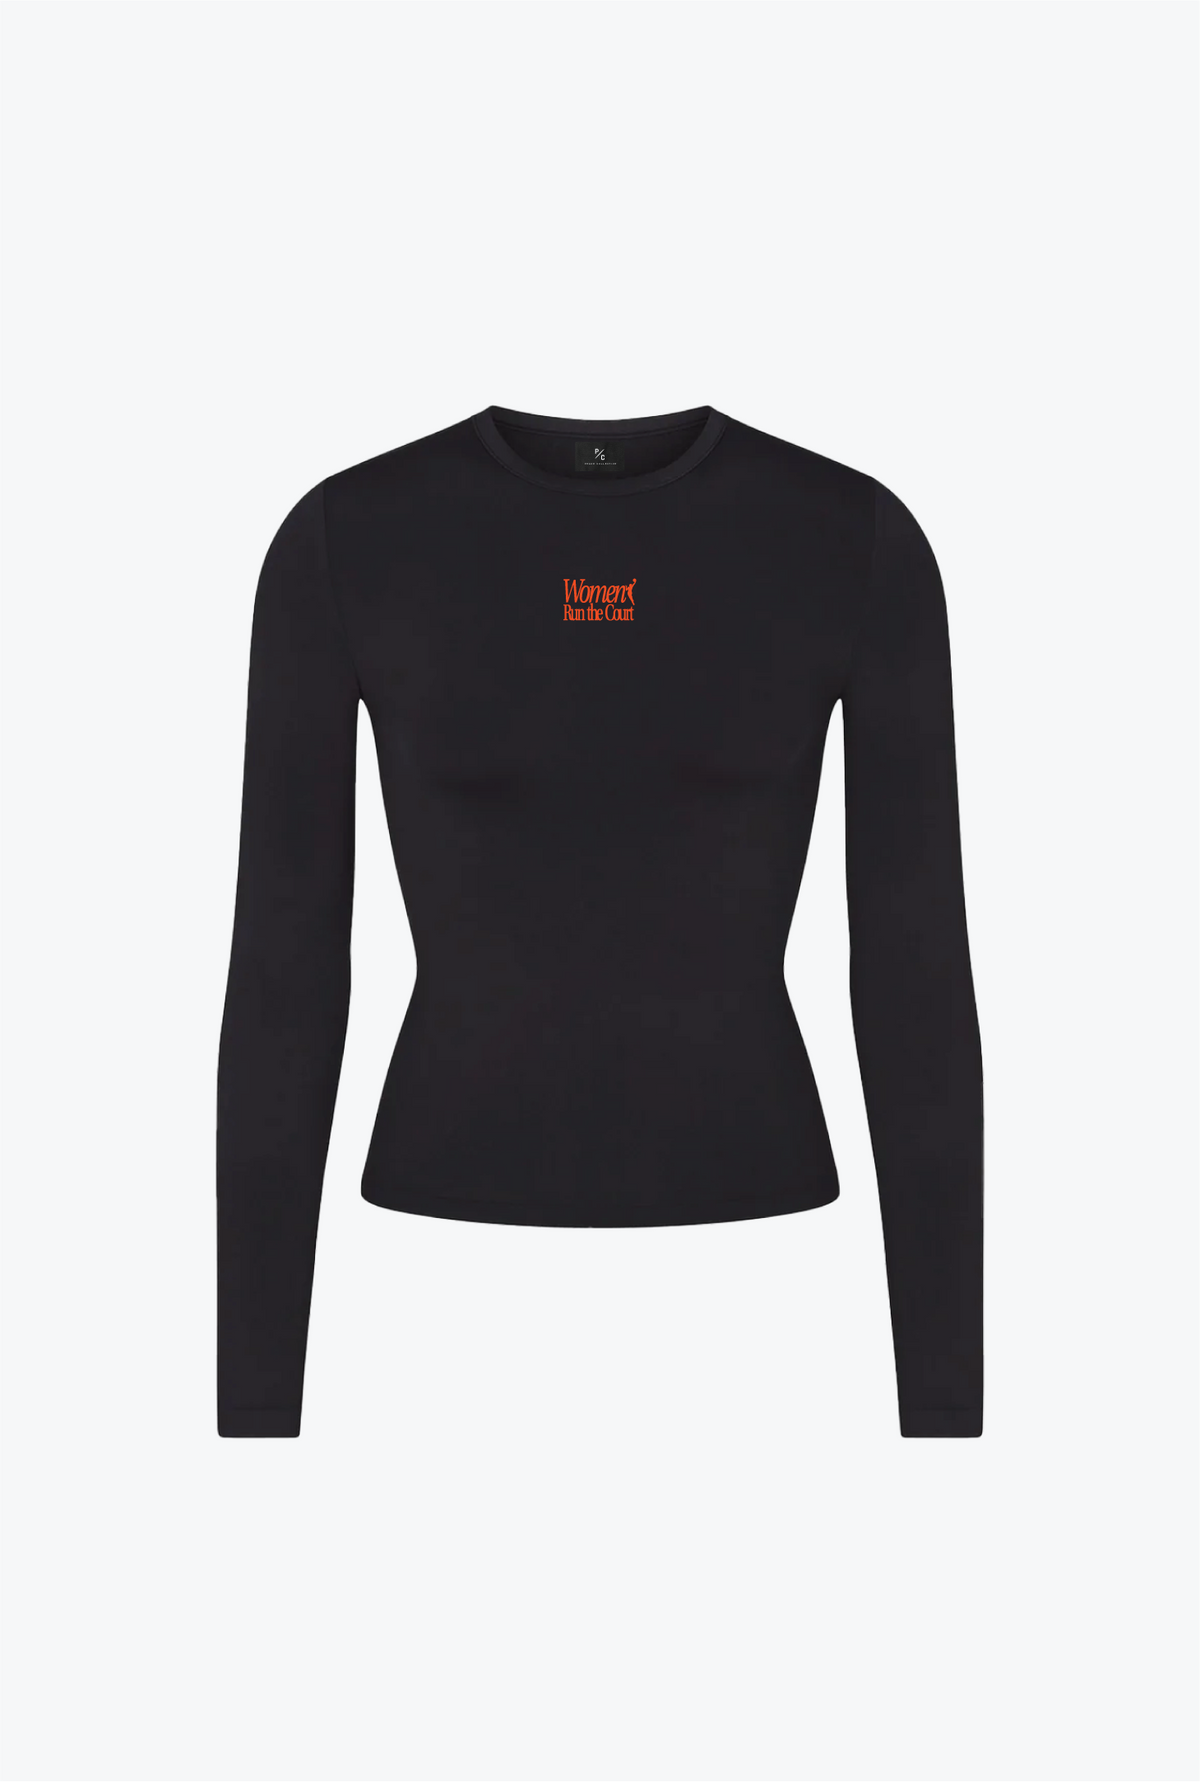 Women Run the Court Fitted Long Sleeve - Black